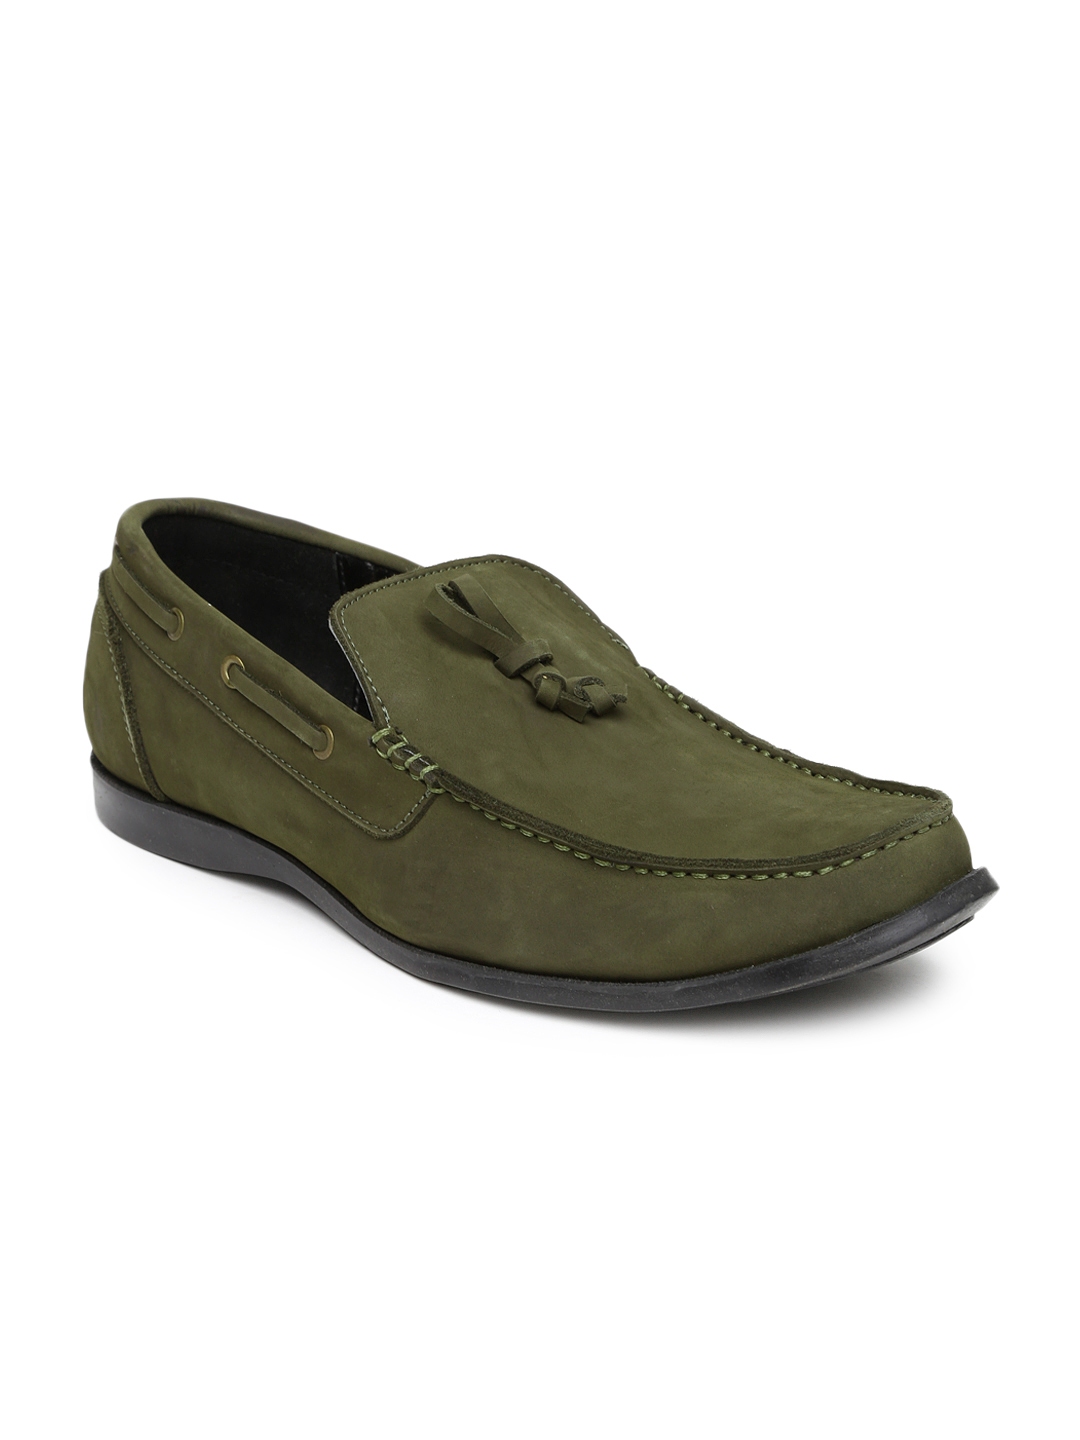 Buy Roadster Men Olive Green Leather Boat Shoes - Casual Shoes for Men ...